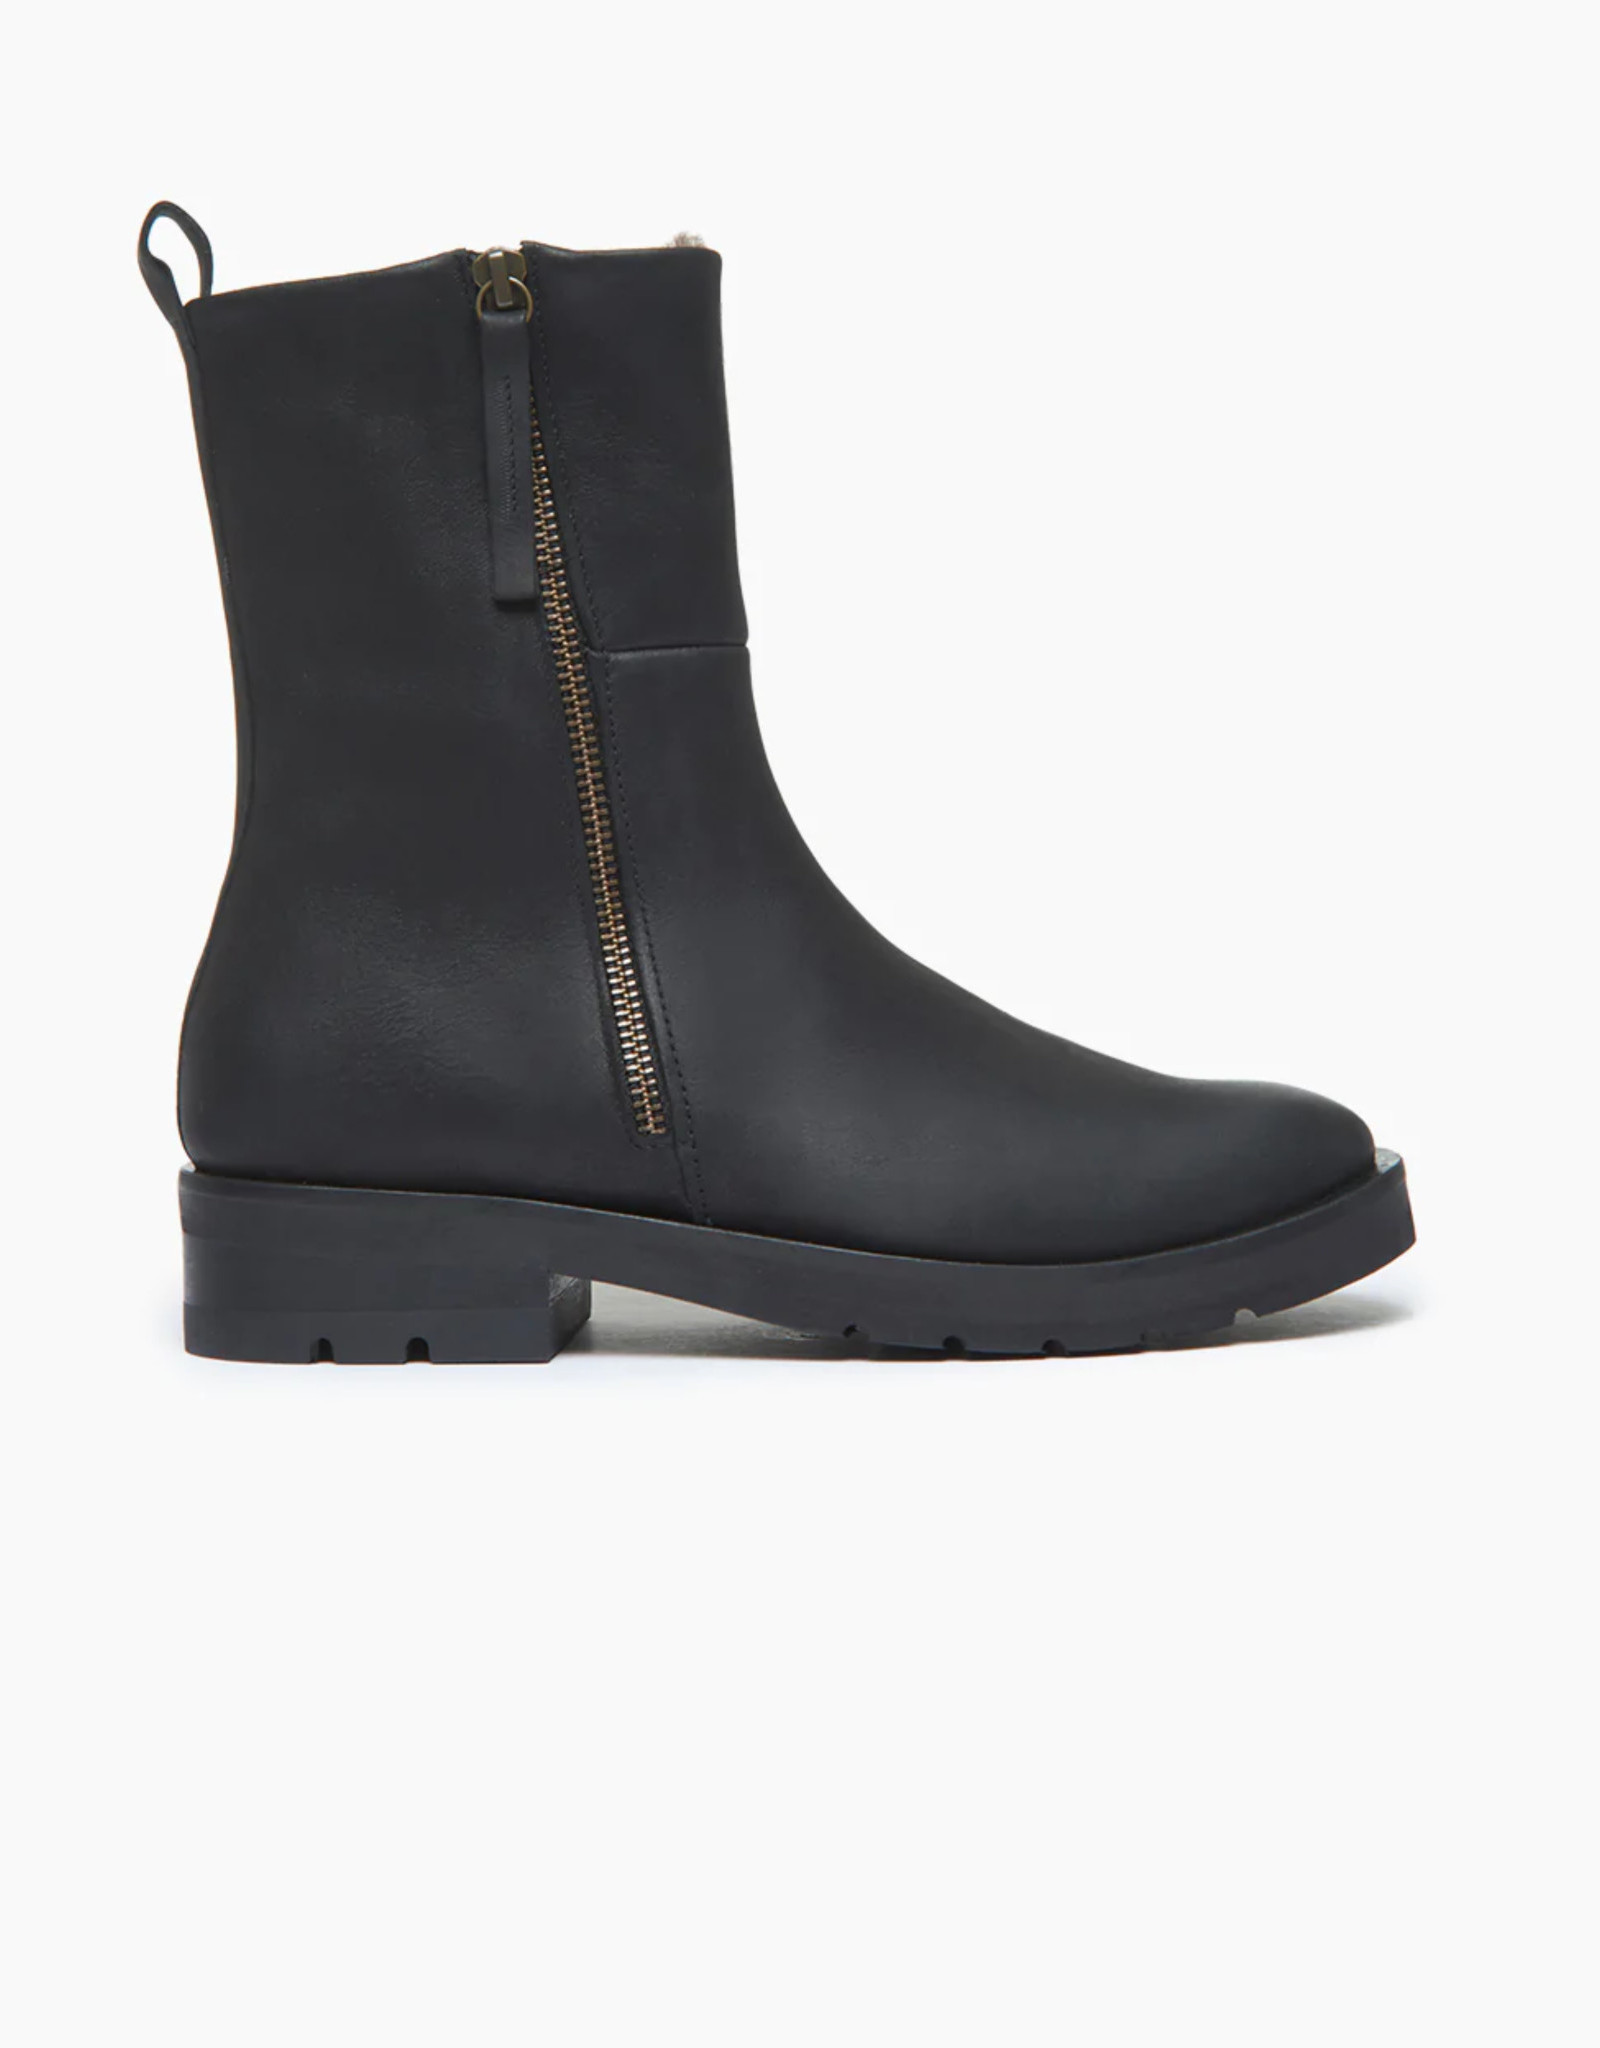 Coclico Black Shearling-lined Durum Boots